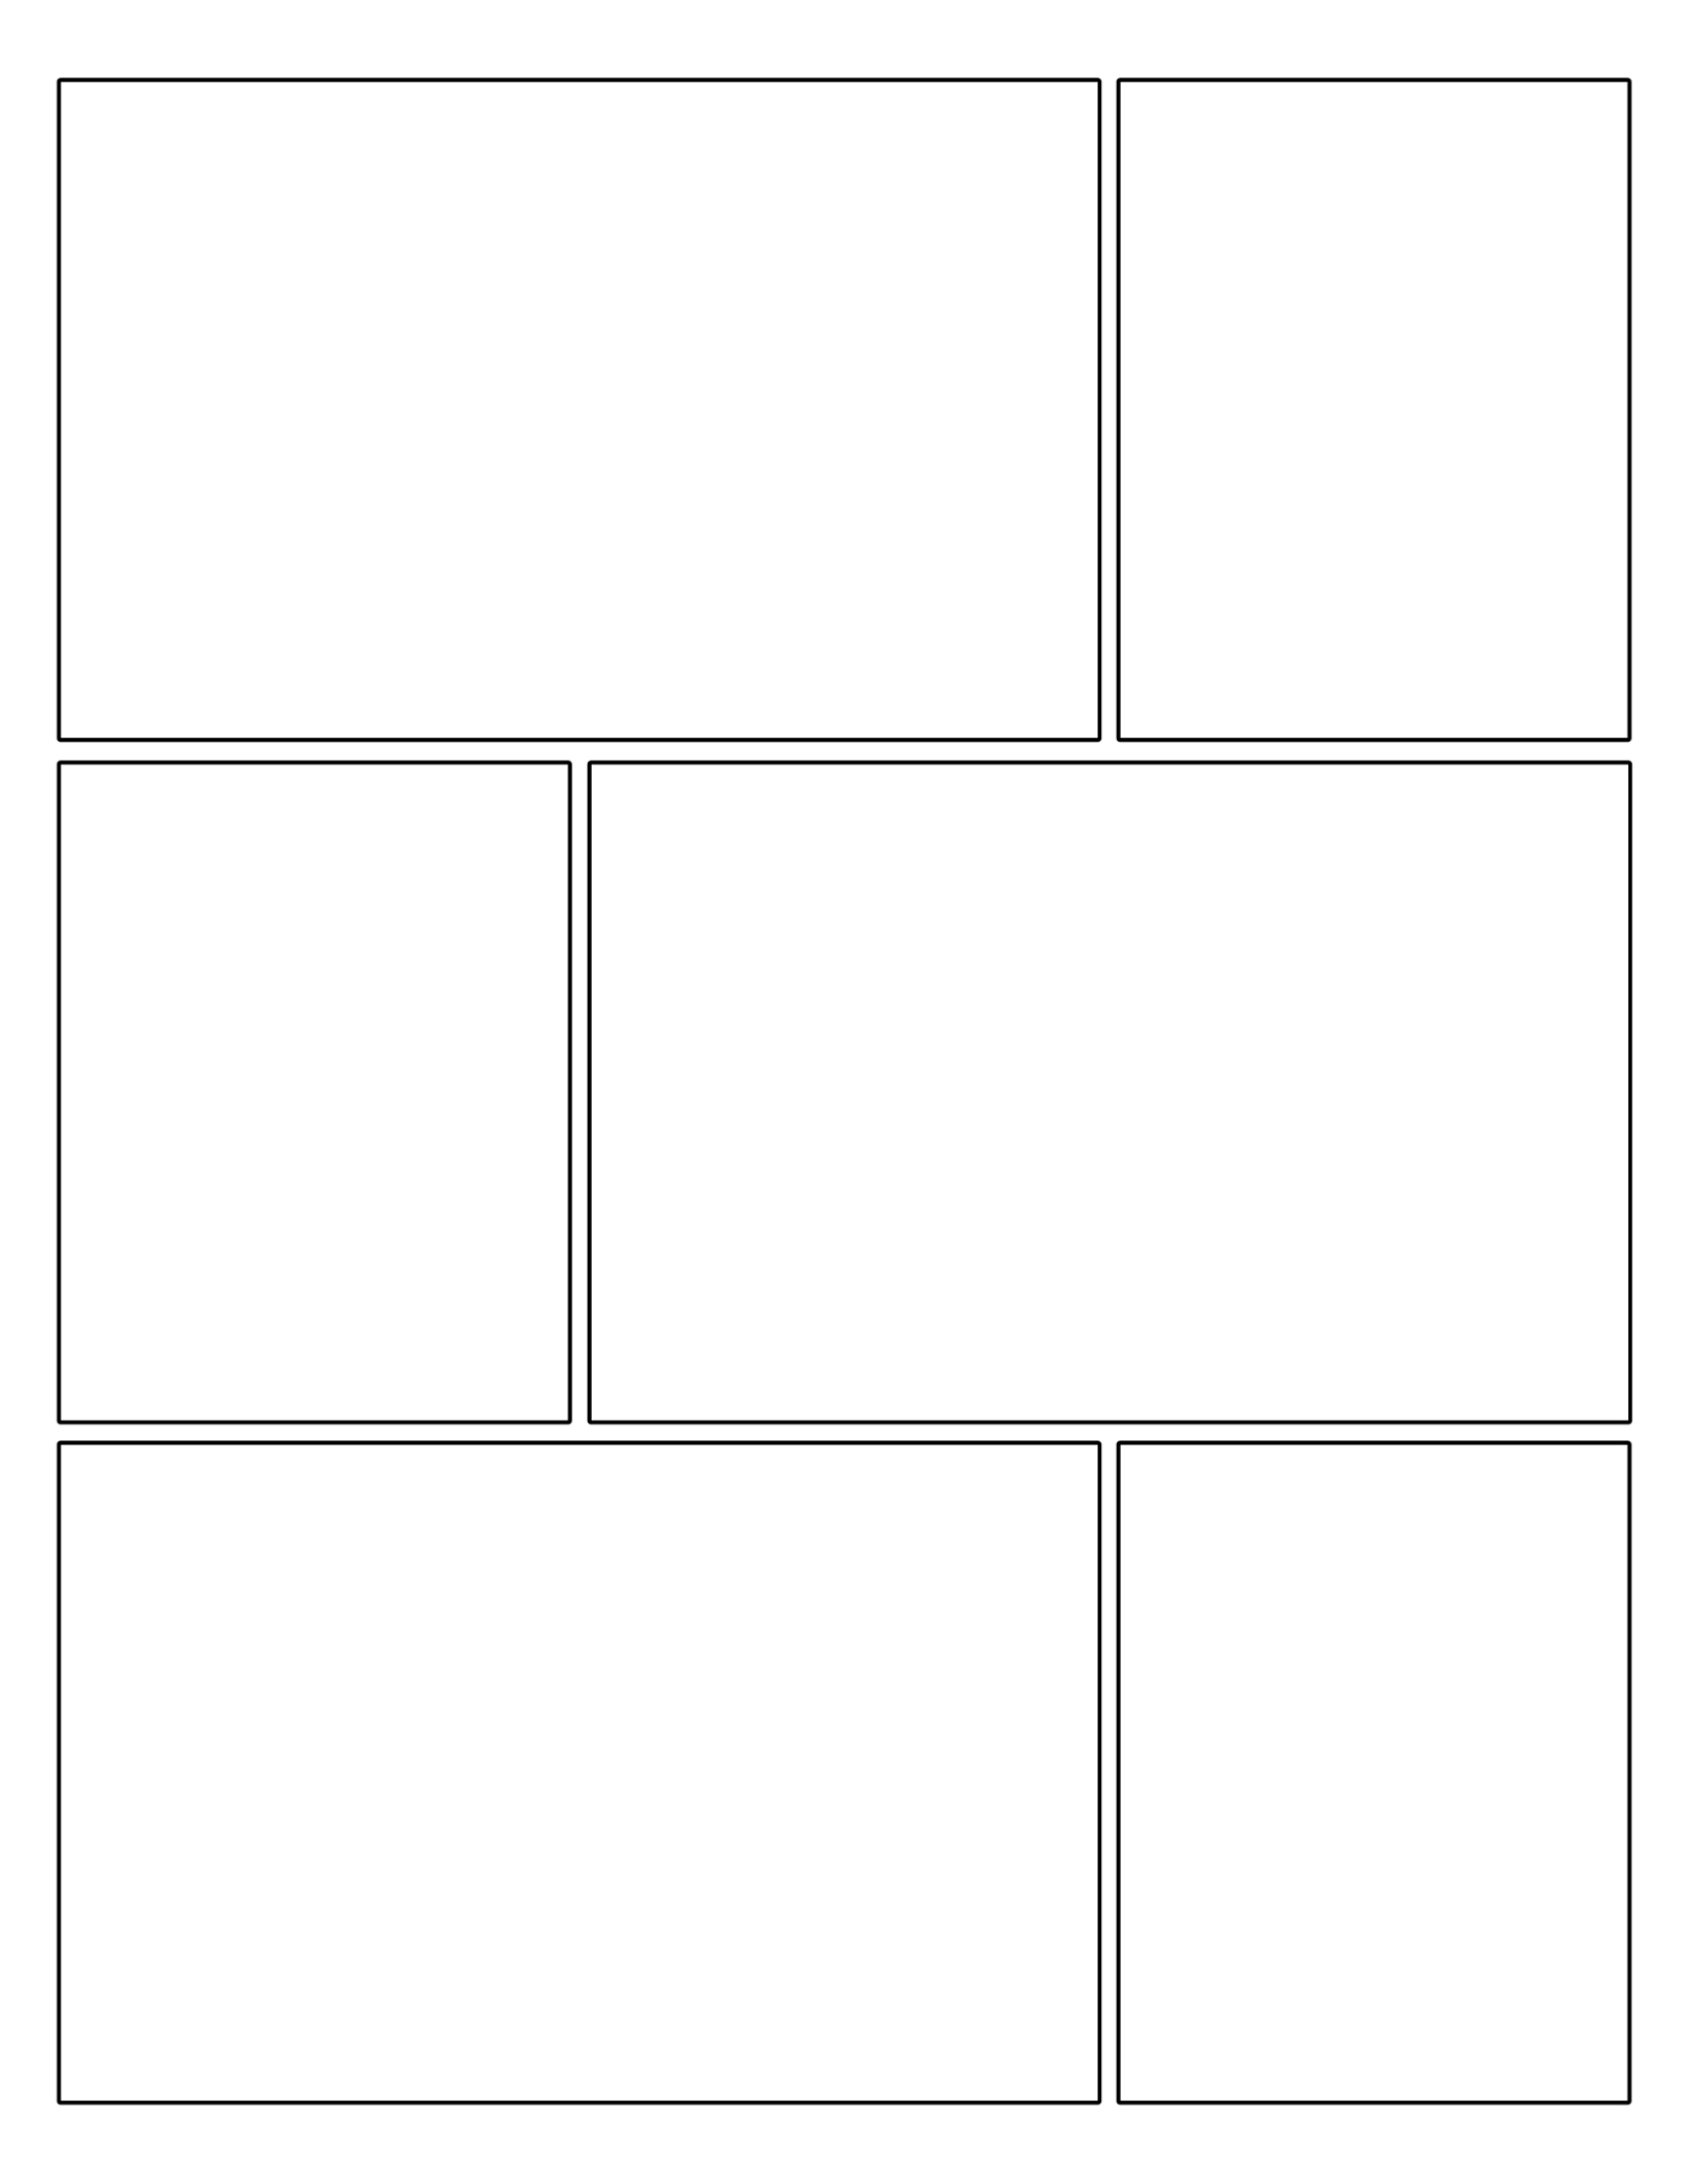 Free Printable Comic Strip Template Pages - Paper Trail Design Throughout Printable Blank Comic Strip Template For Kids